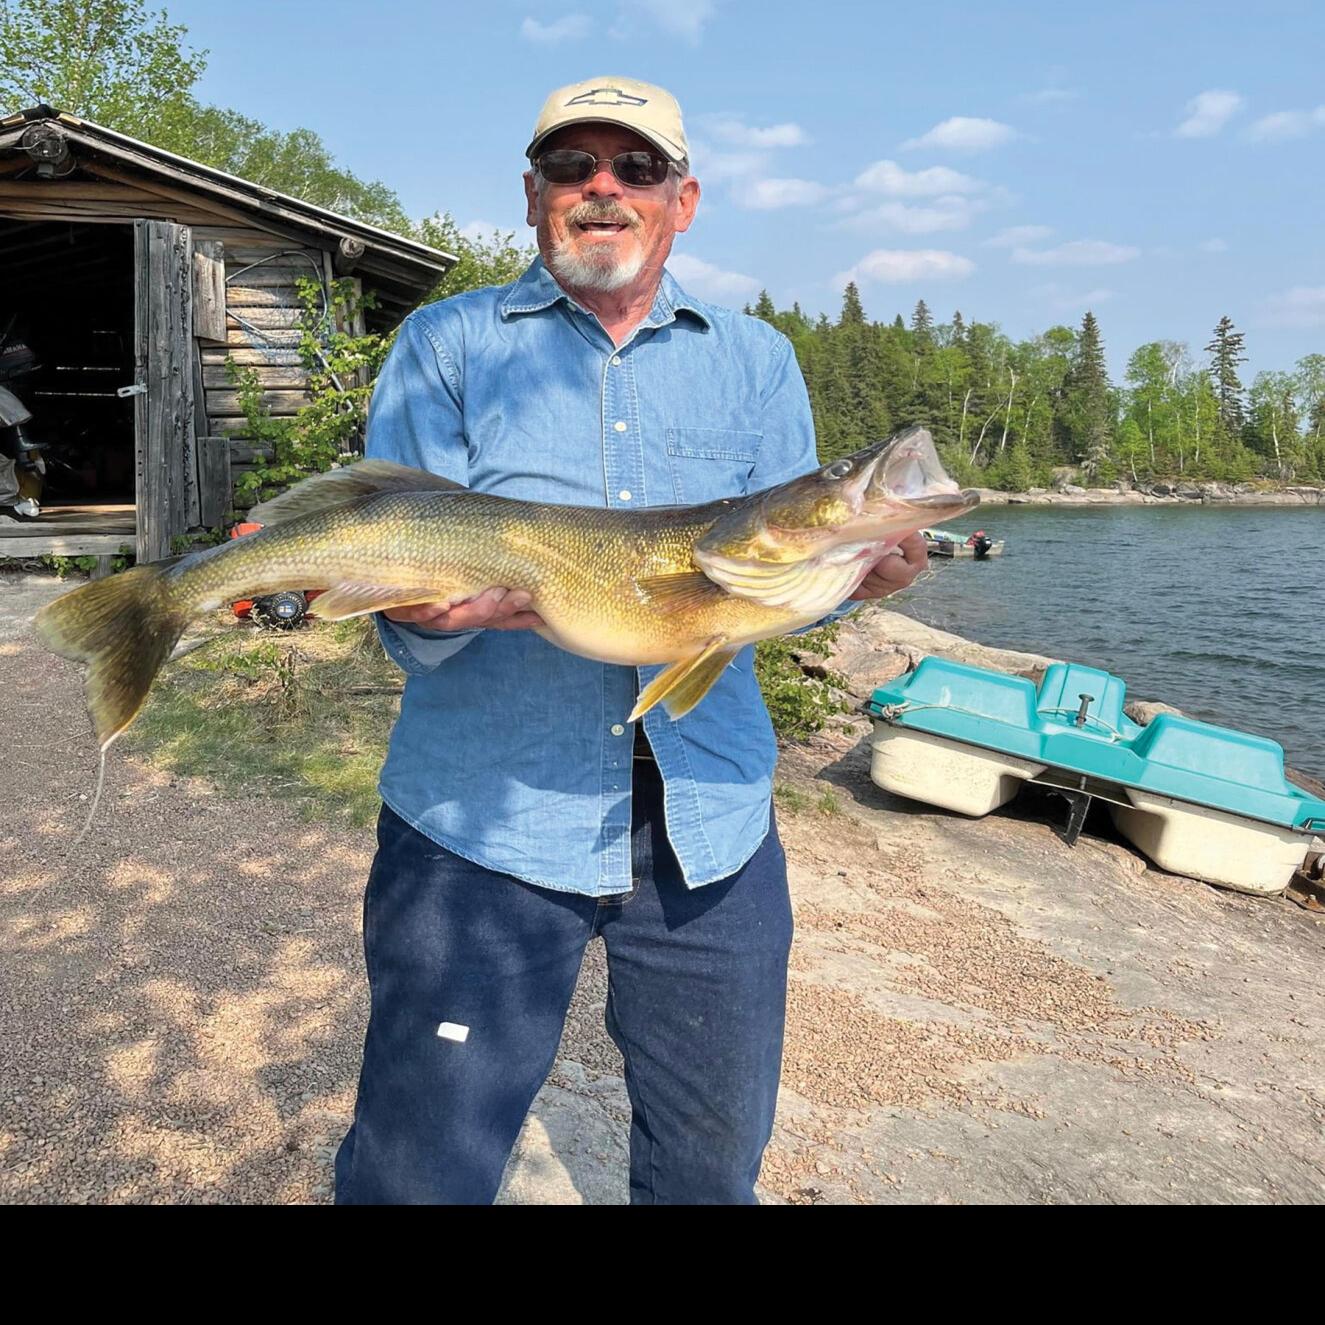 Outdoors with Luke: Luke heads to Canada for fishing trip, Sports